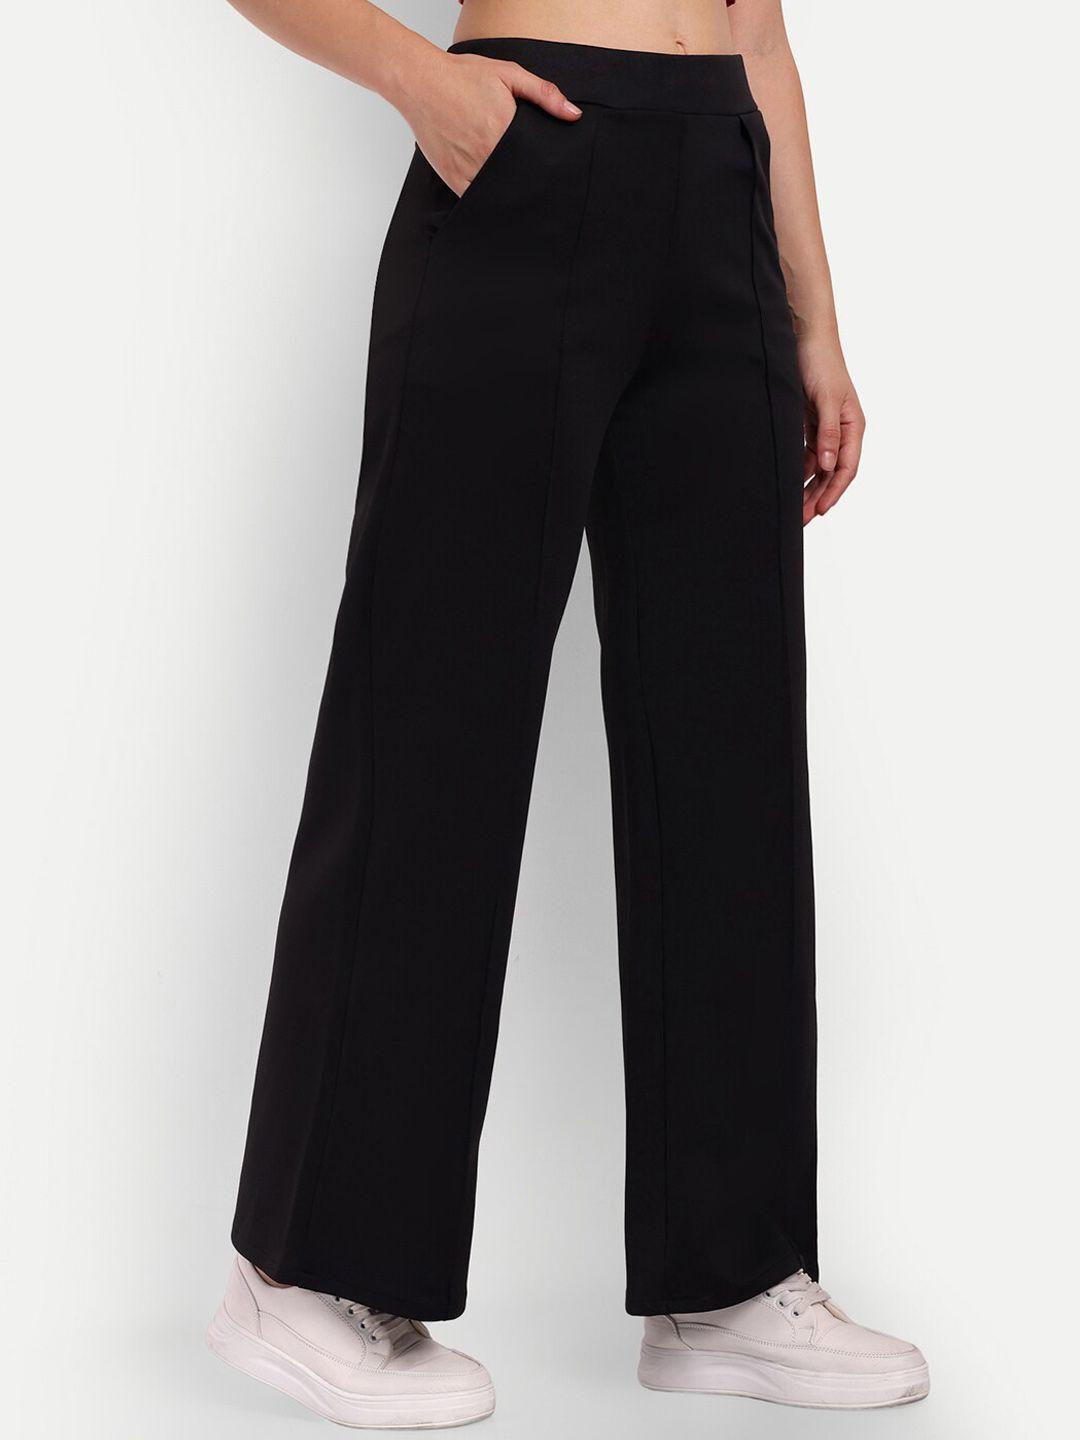 Next One Women Smart Straight Fit High-Rise Easy Wash Cotton Parallel Trousers